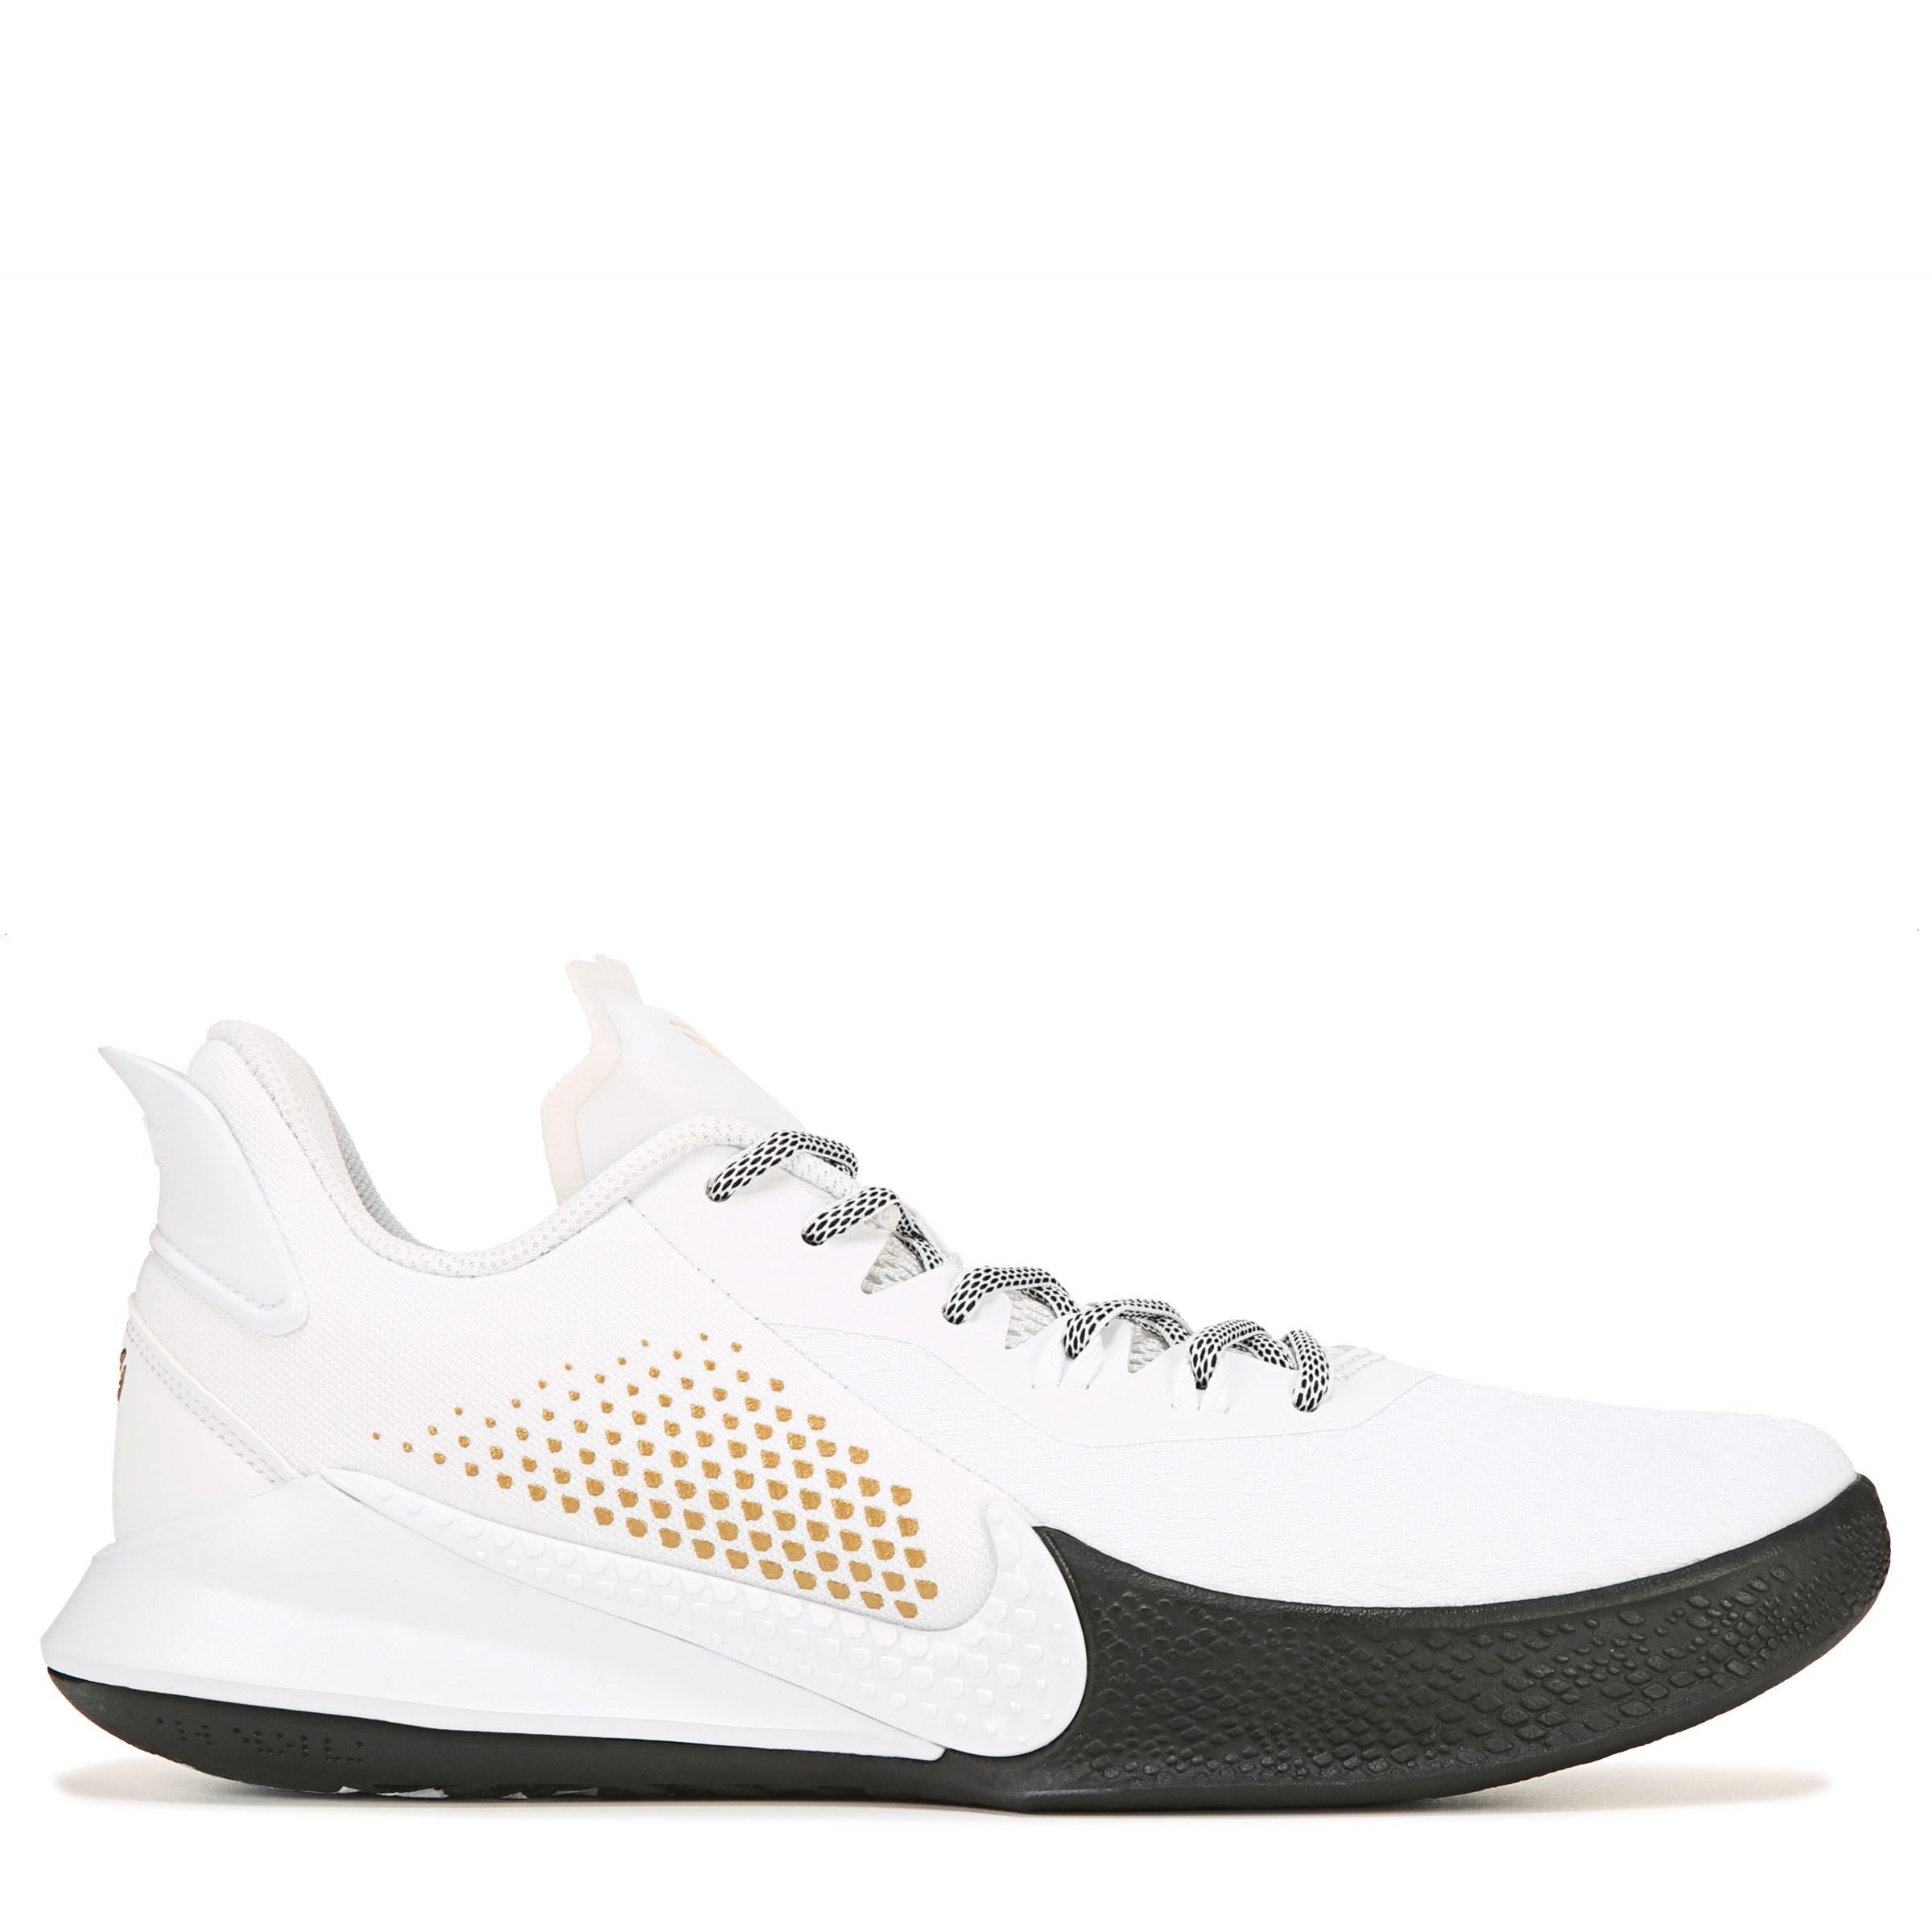 Nike Rubber Mamba Fury Basketball Shoes in White/Gold (White) for Men ...